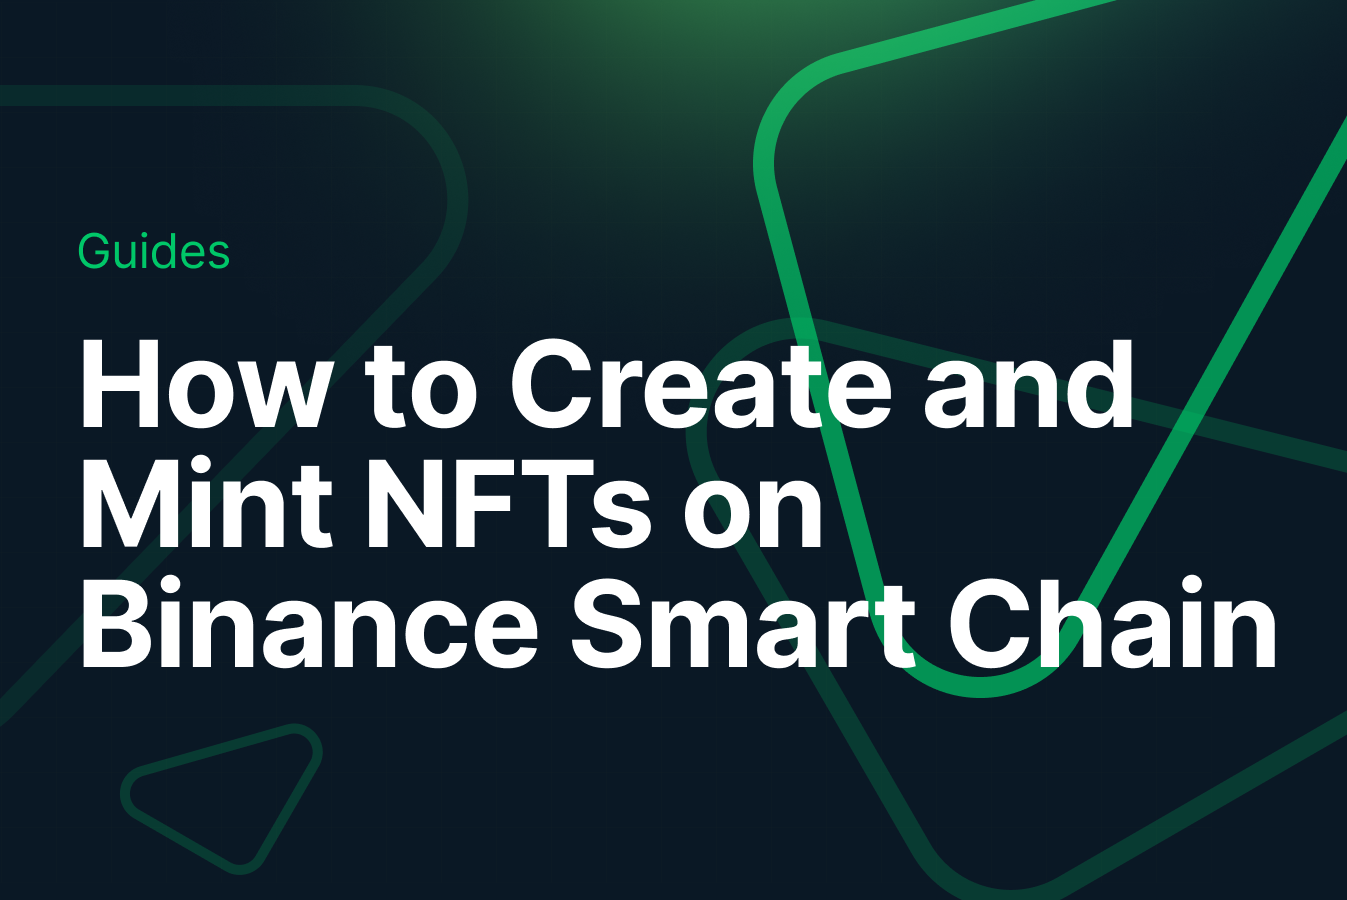 How to Create and Mint NFTs on Binance Smart Chain